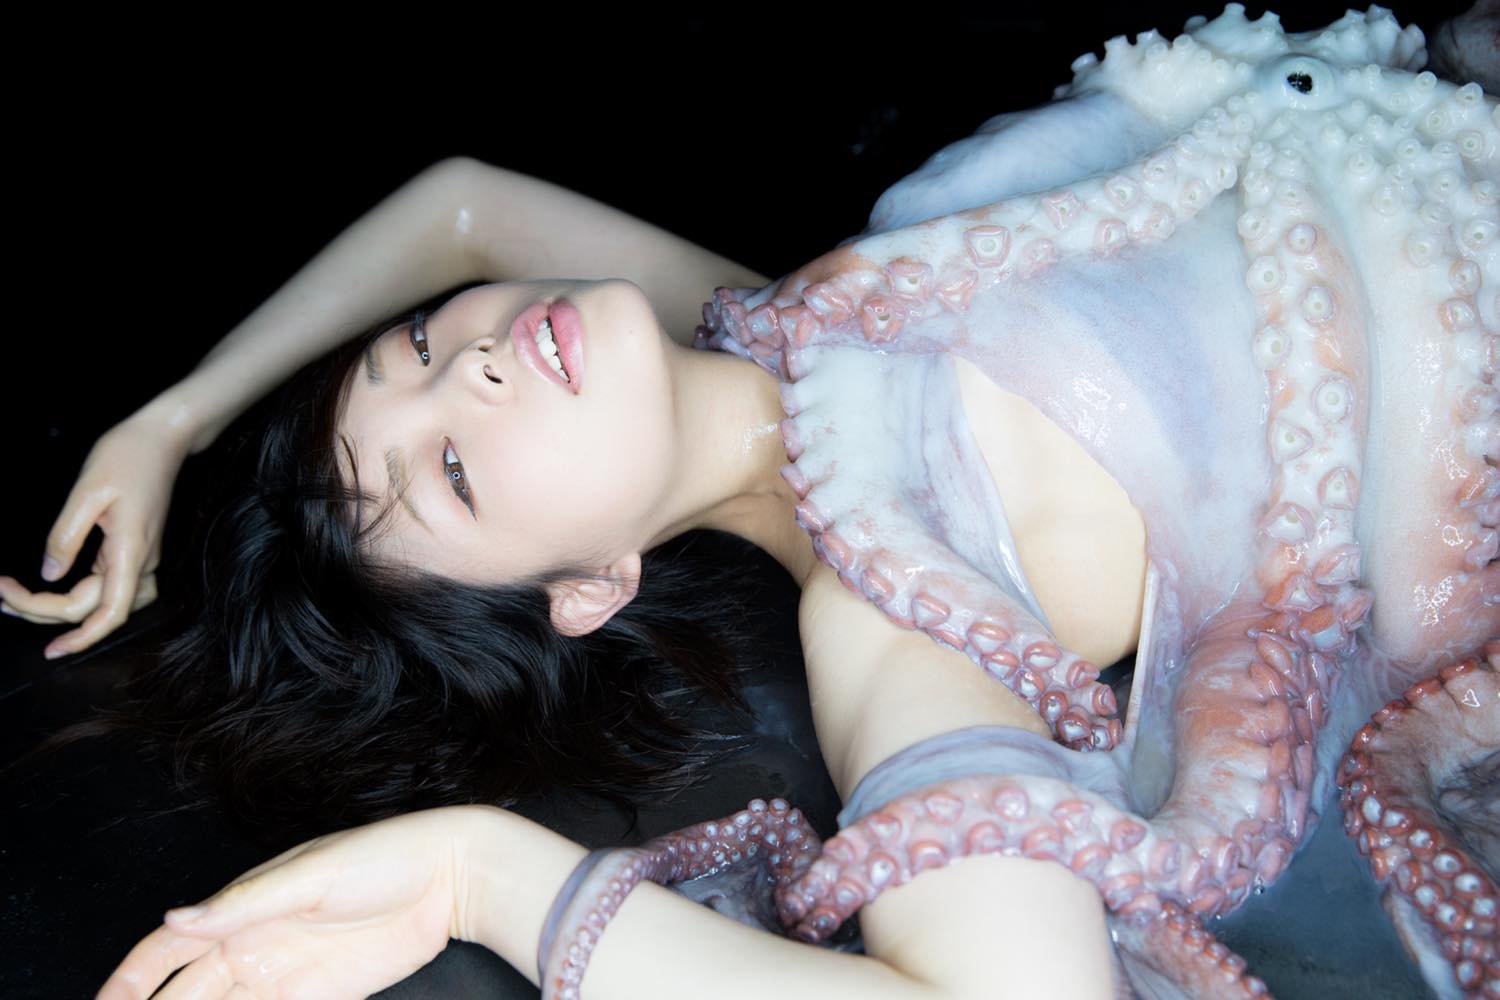 The Glistening Combination of Octopus and Woman! 